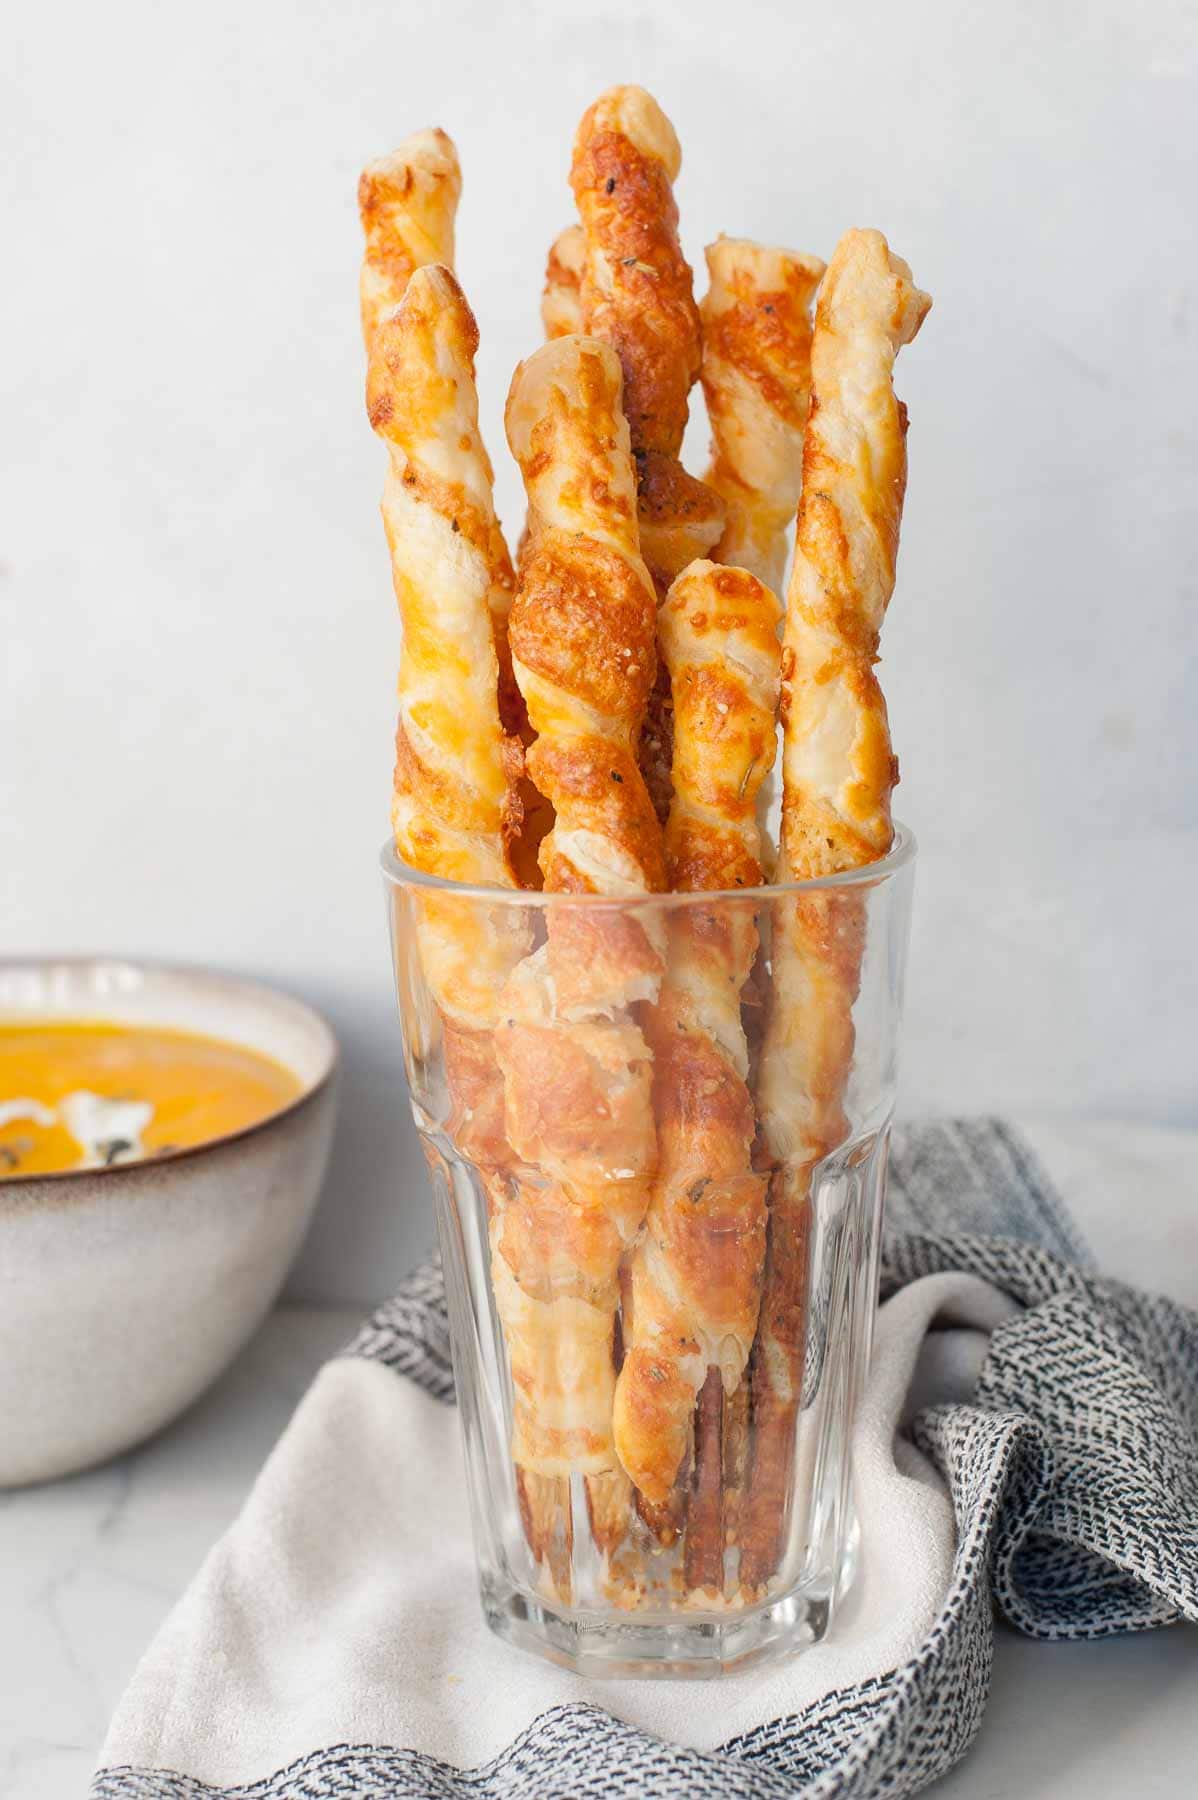 Puff pastry cheese straws in a glass.